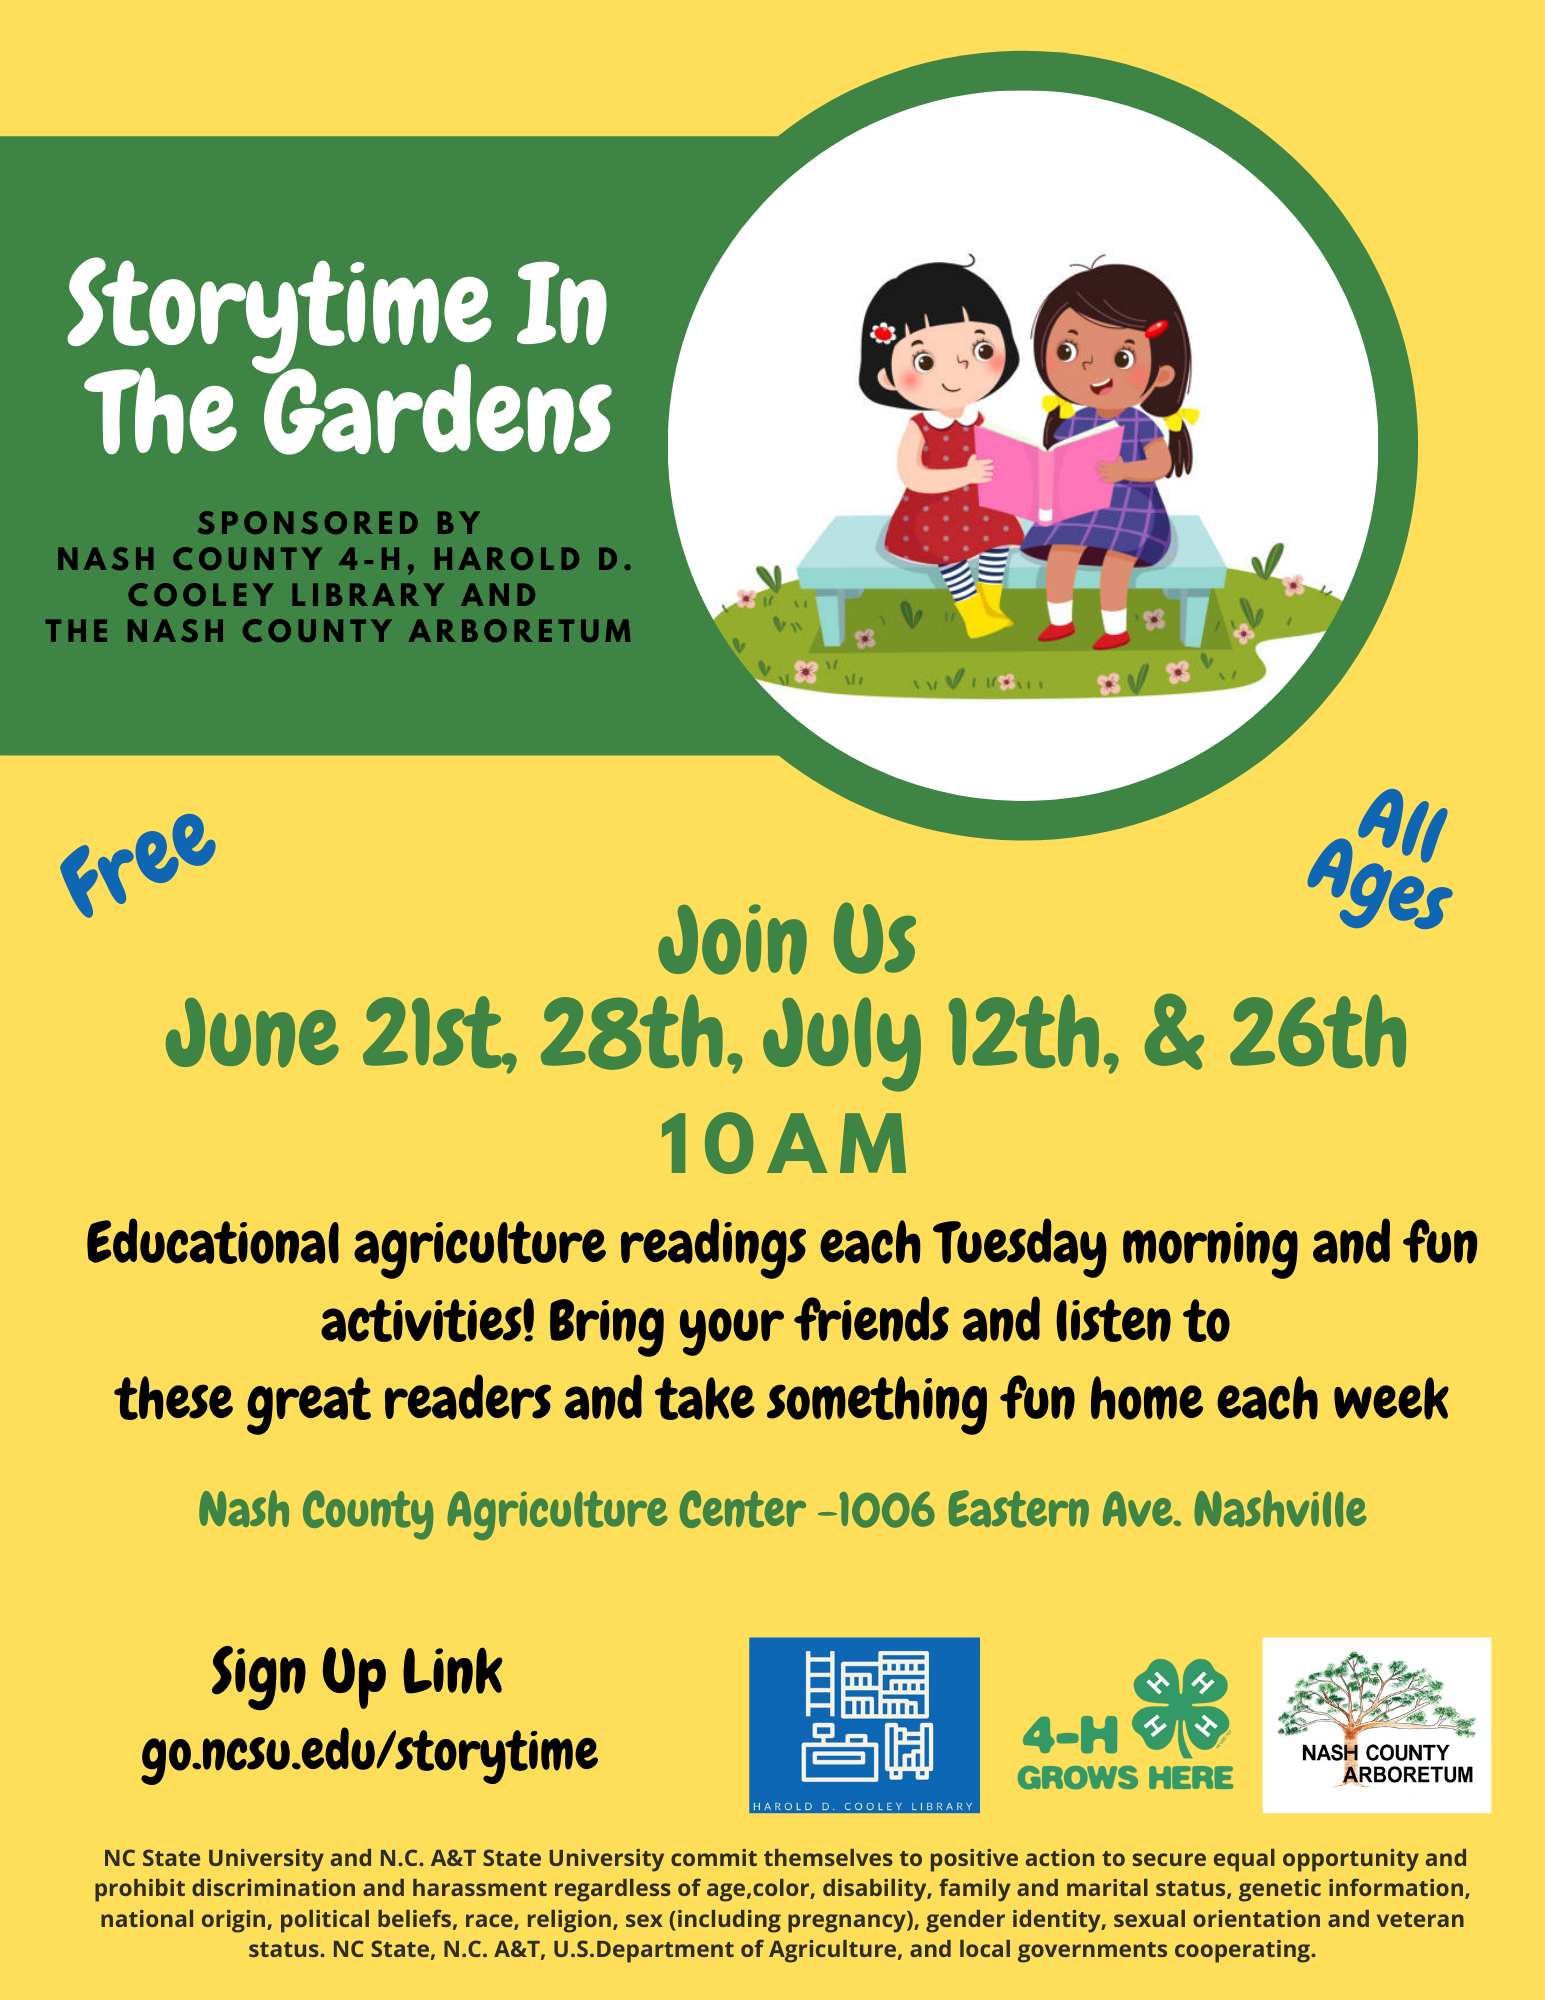 A flyer for storytime in the Gardens, June 21st, June 28th, July 12th, July 26th at 10 a.m. 